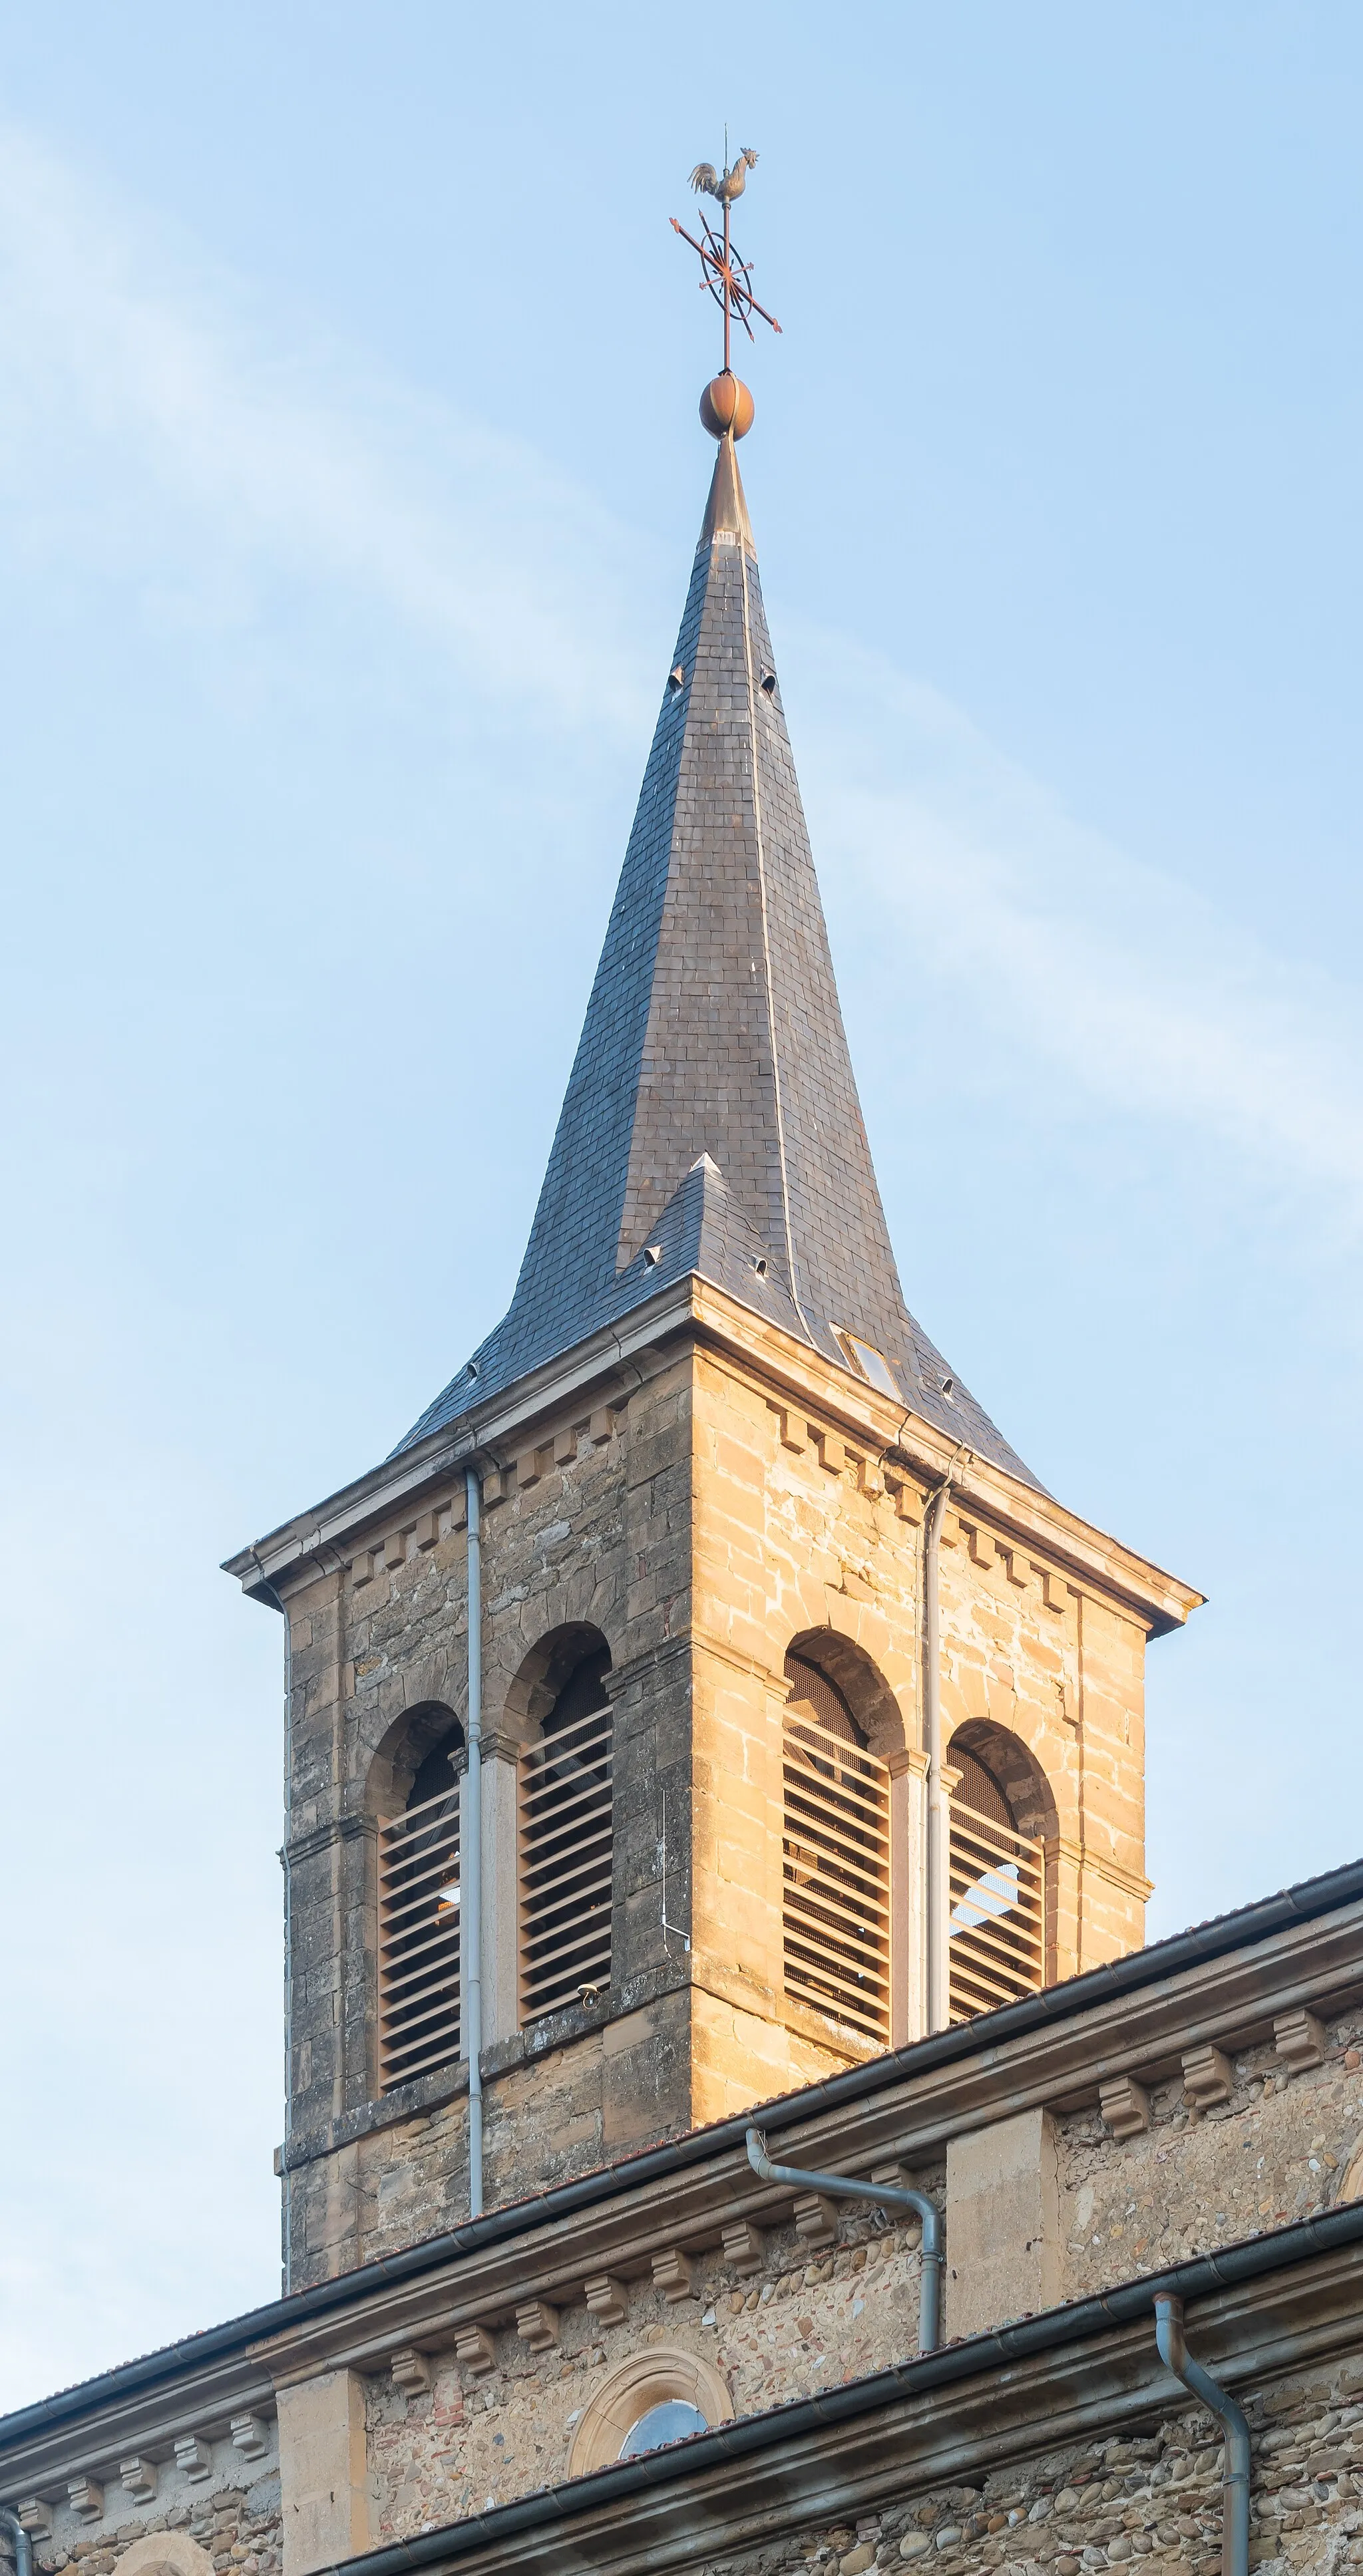 Photo showing: Bell tower of the Saint John the Baptist church in Saint-Jean-de-Bournay, Isère, France